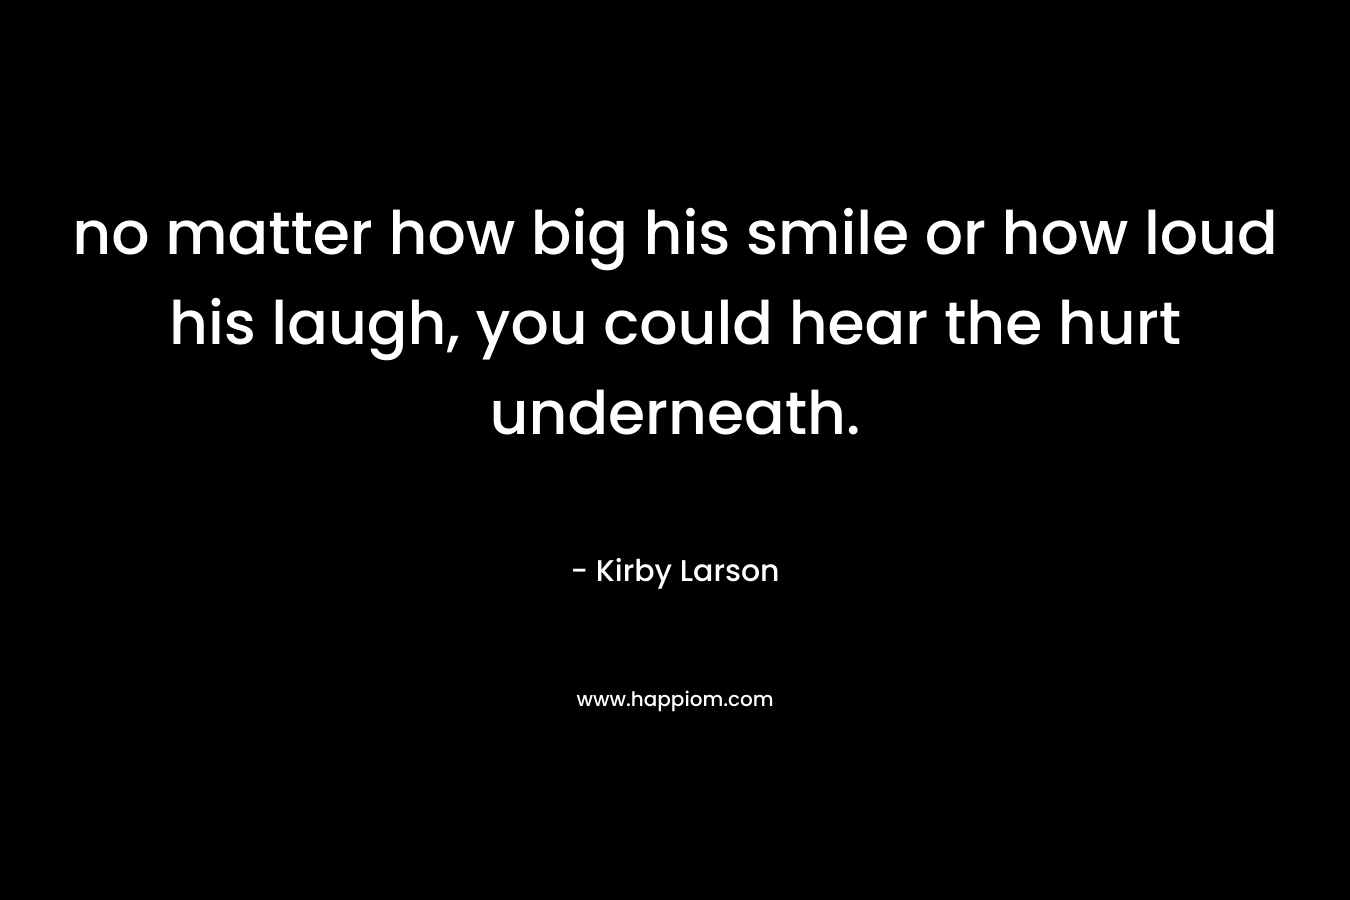 no matter how big his smile or how loud his laugh, you could hear the hurt underneath.